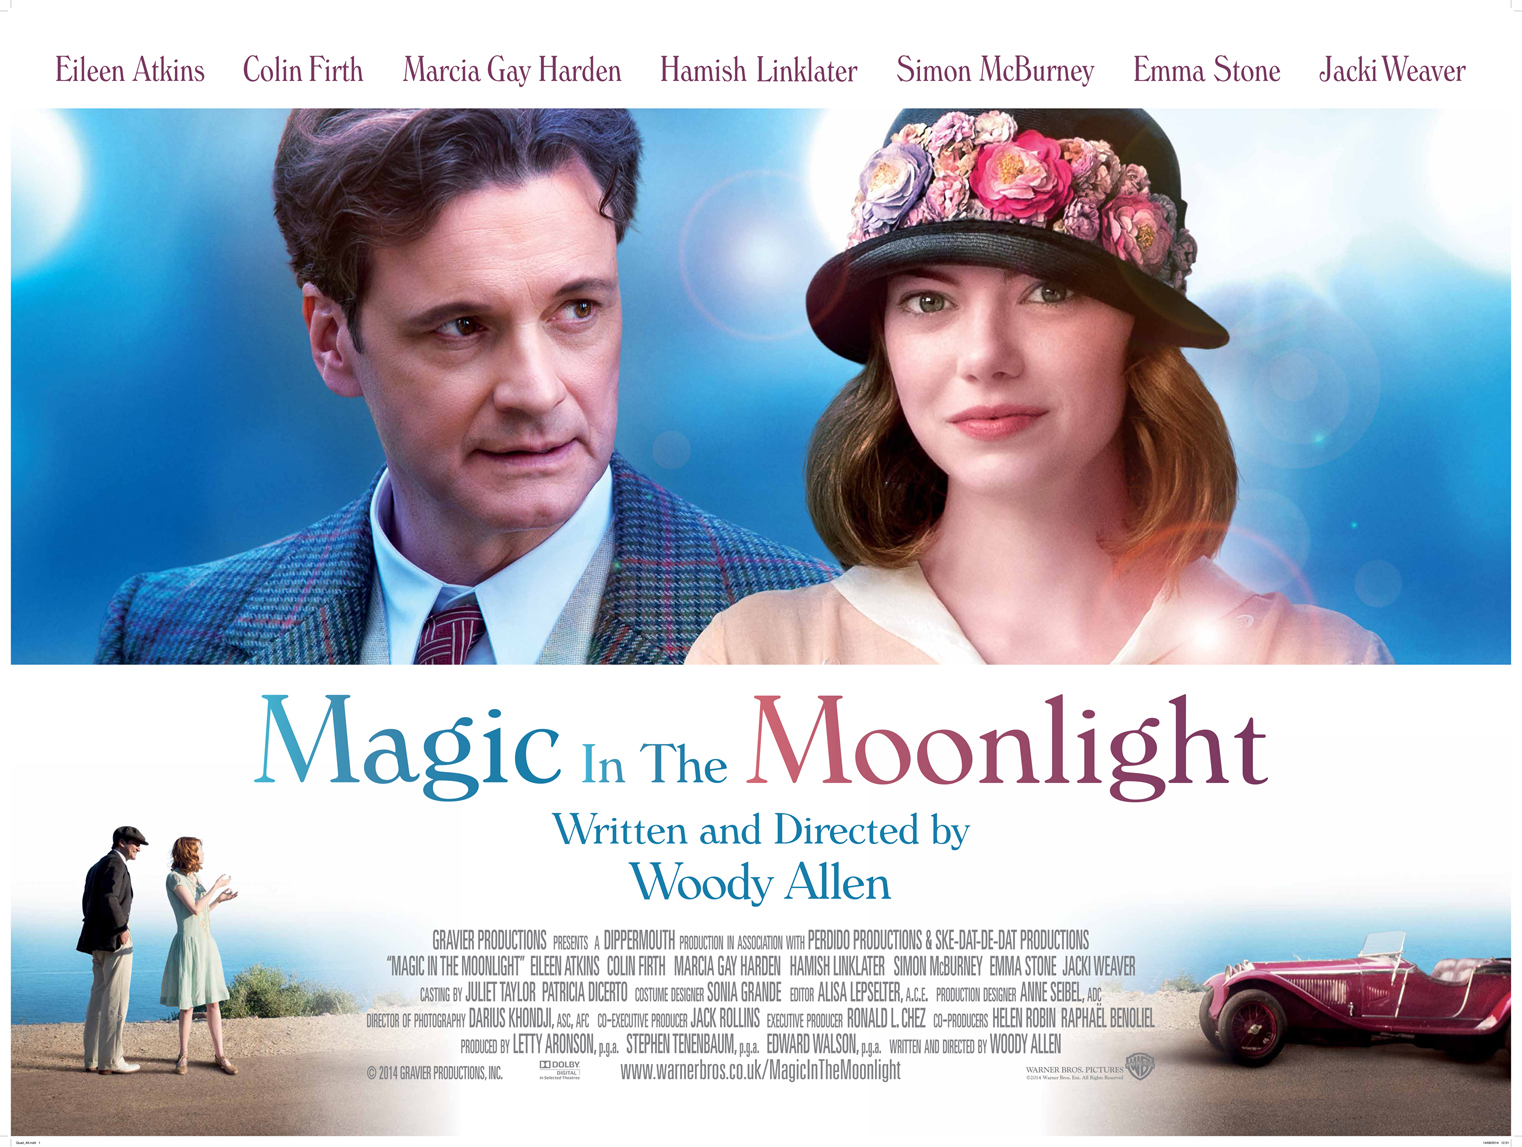 The rose rosa: Magic in the Moonlight